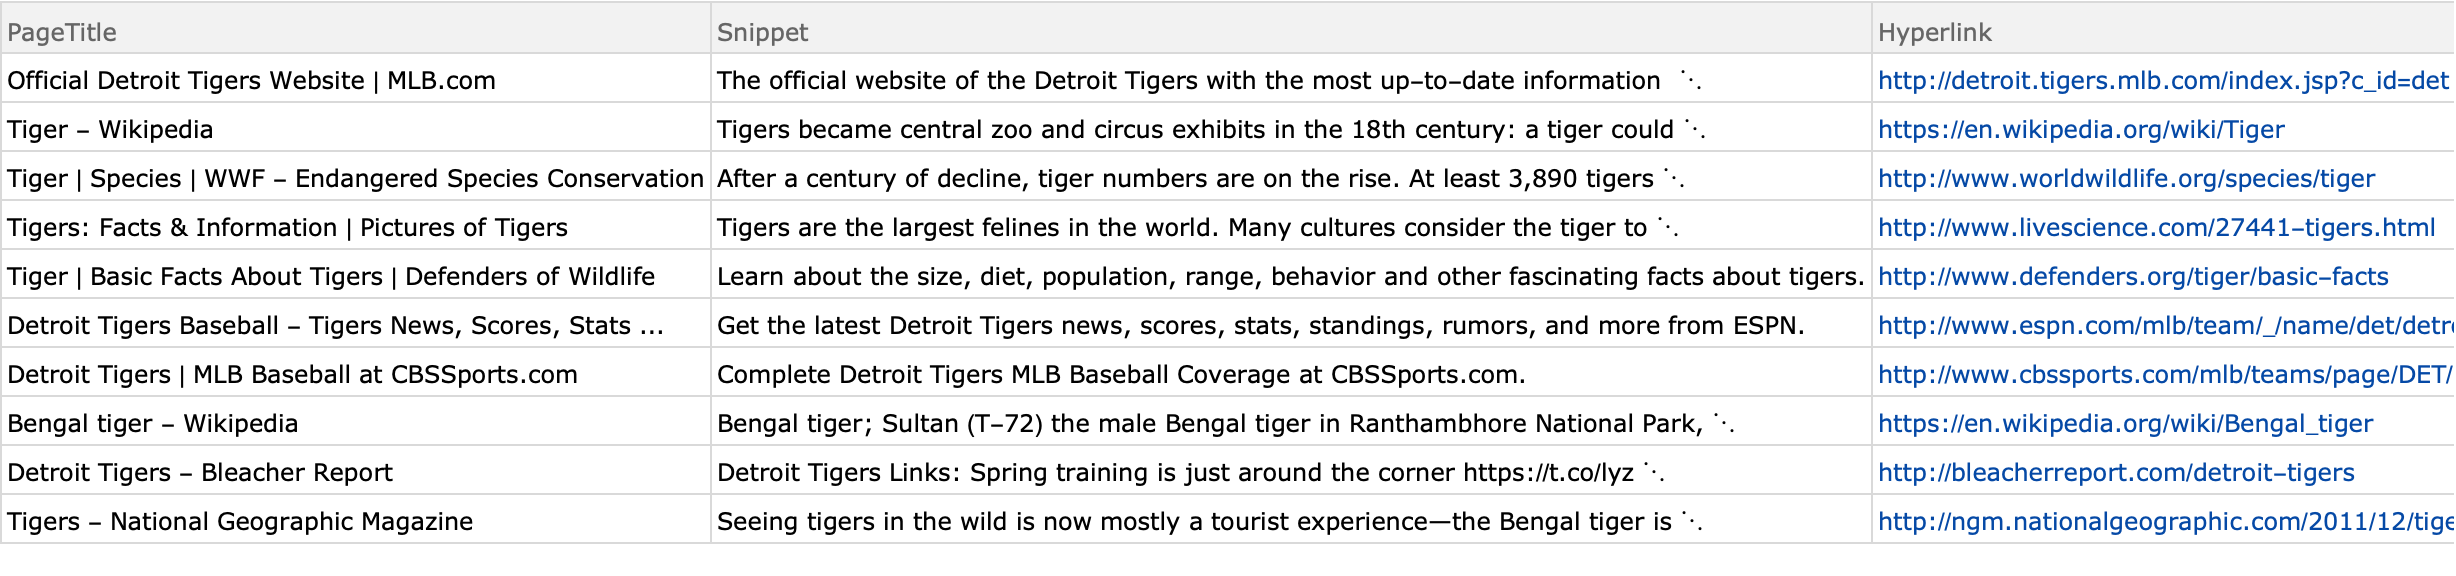 History of the Detroit Tigers - Wikipedia